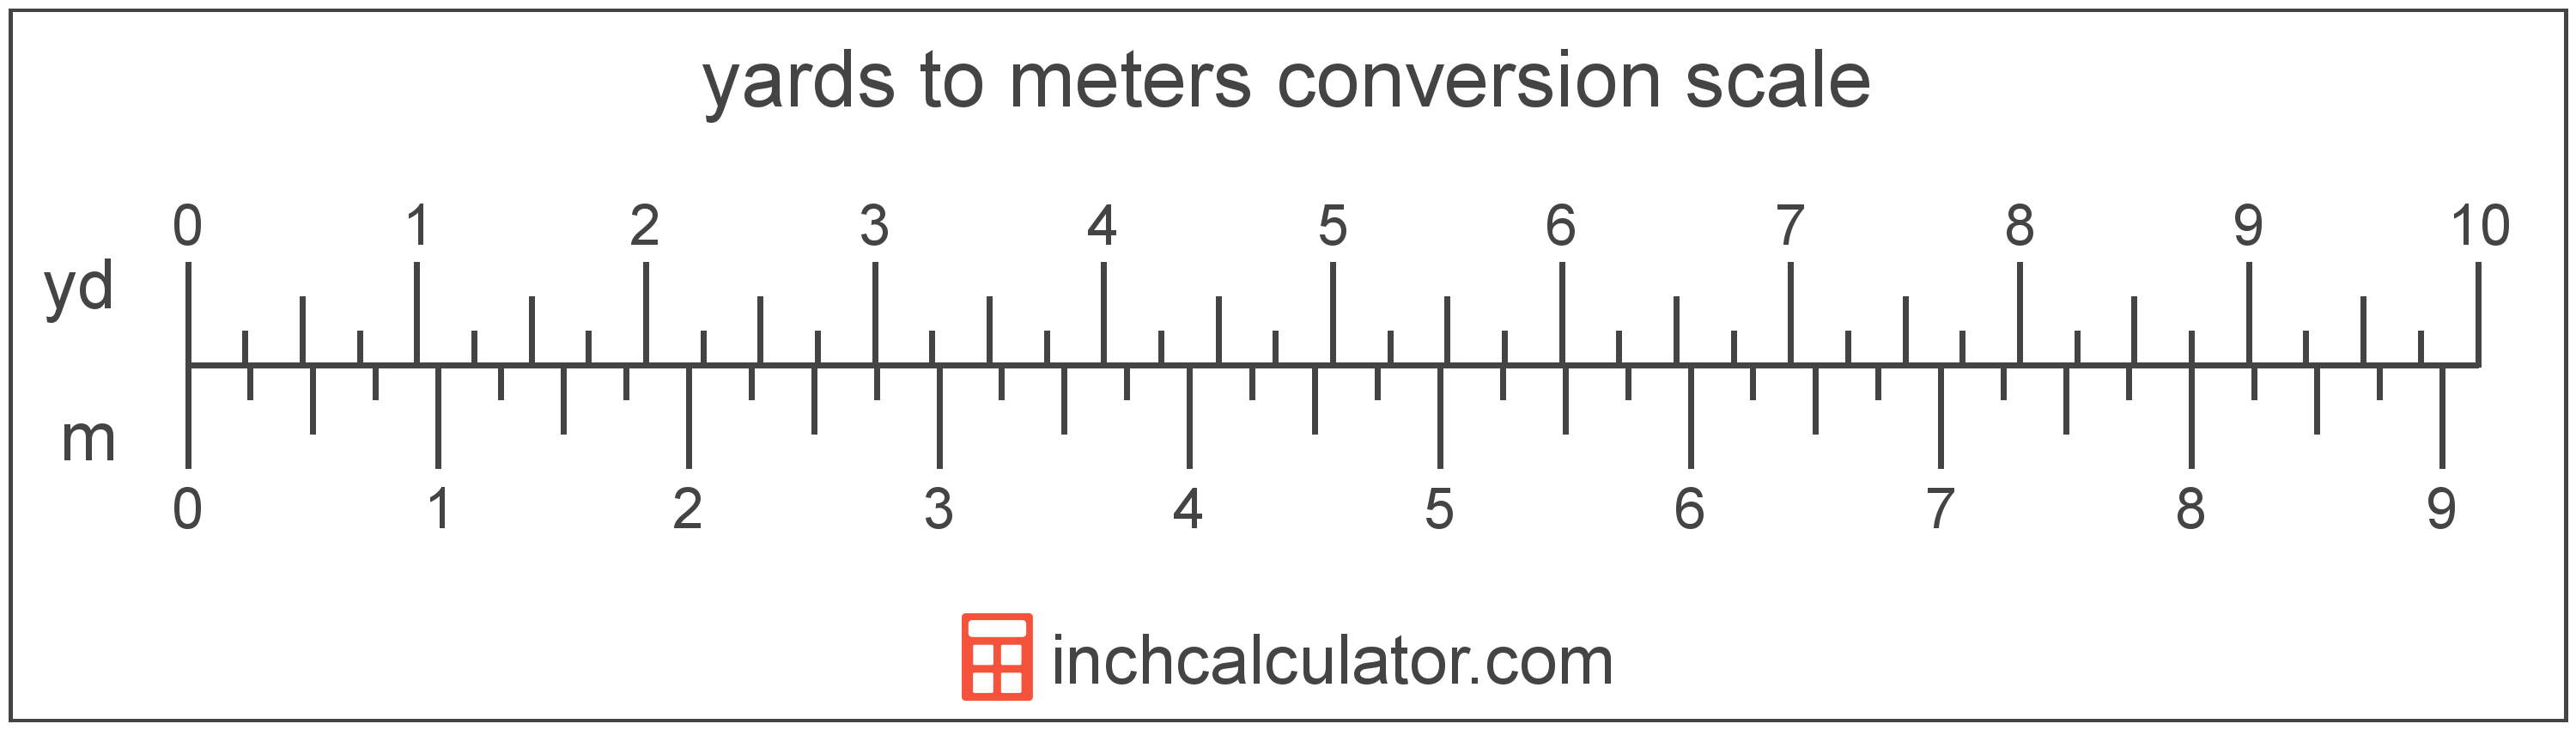 conversion scale showing meters and equivalent yards length values